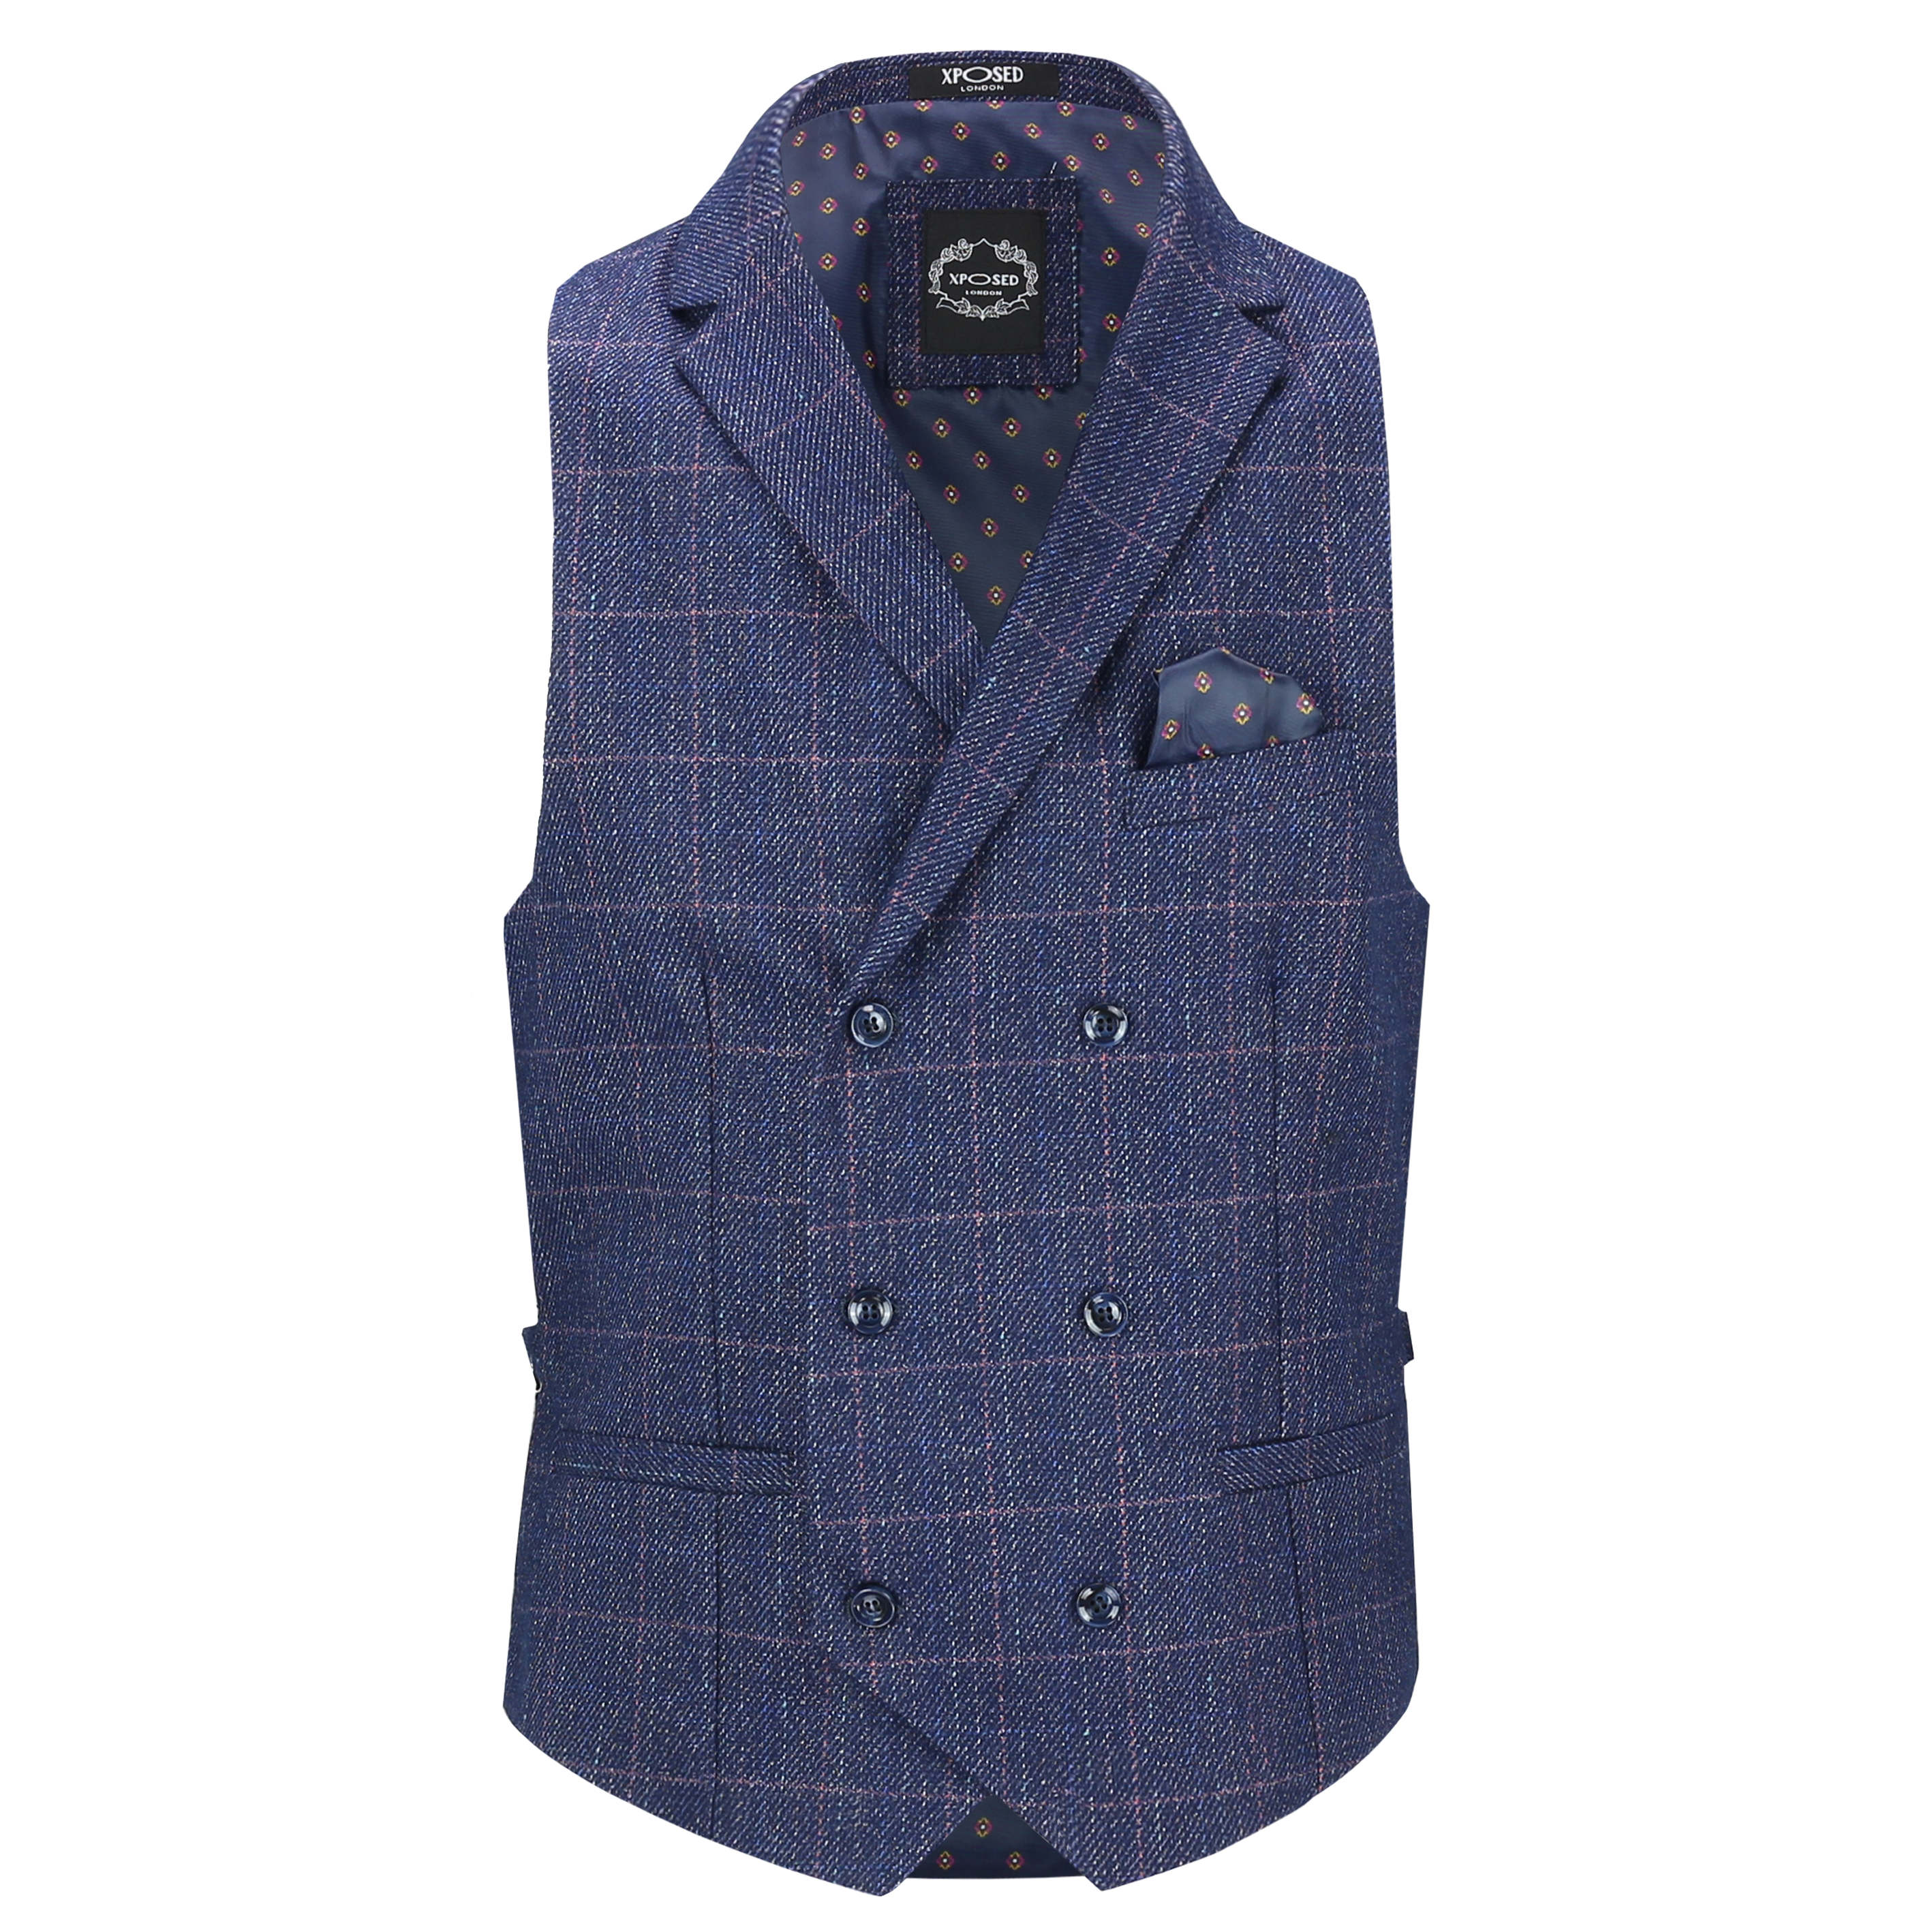 MEN'S TWEED CHECK Waistcoat Vintage Double Breasted Collar Tailored Fit ...